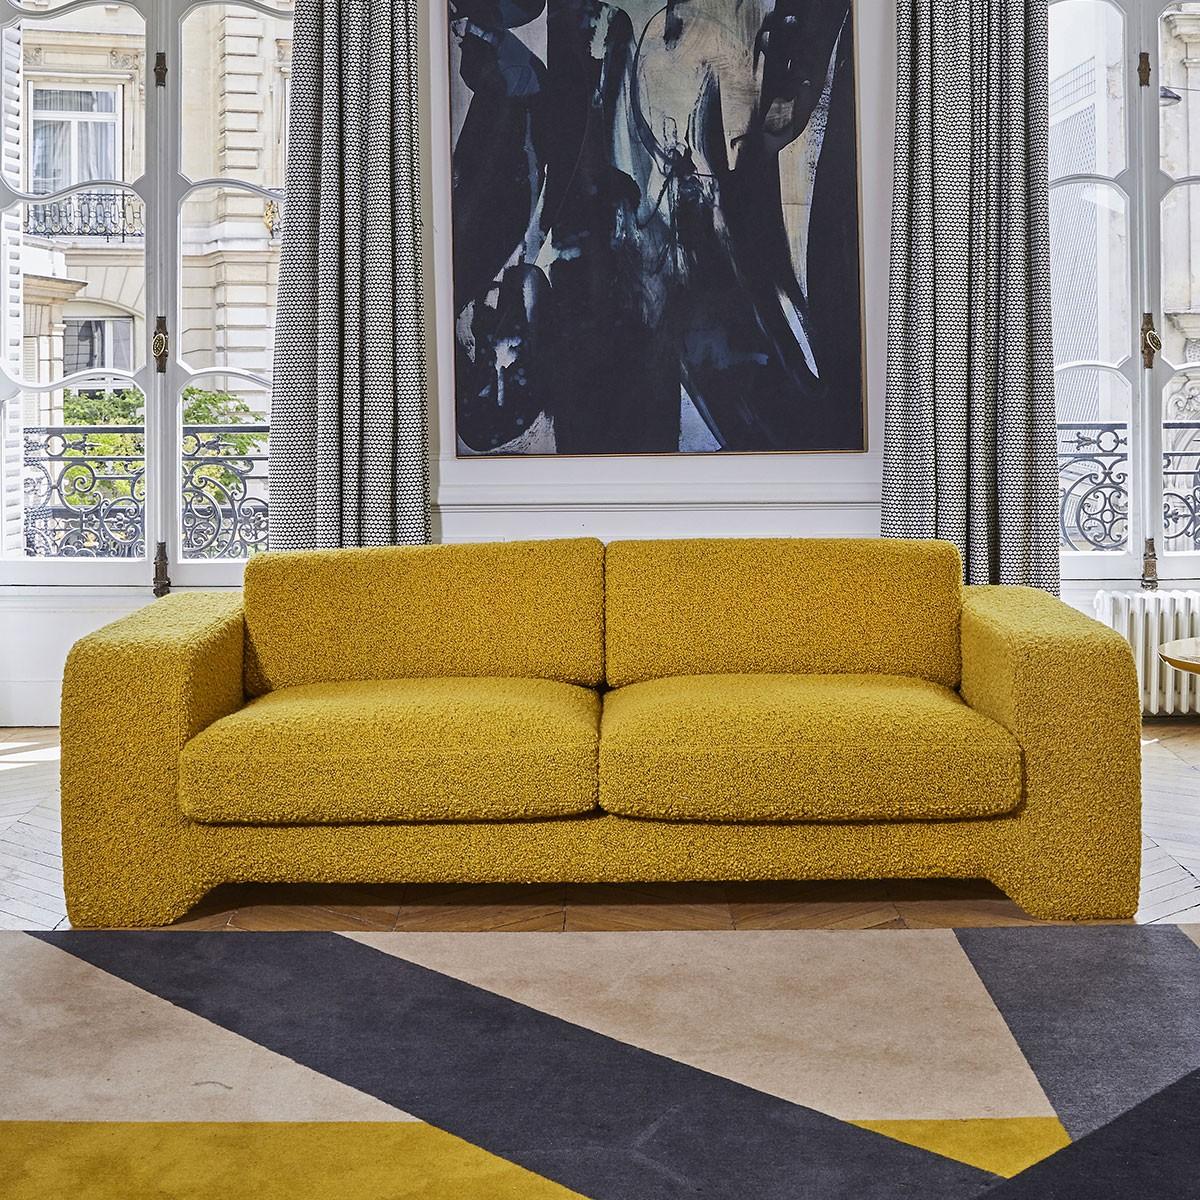 Popus Editions Giovanna 4 seater sofa in green Verone velvet upholstery

Giovanna is a sofa with a strong profile. A sober, plush line, with this famous detail that changes everything, so as not to forget its strength of character and this